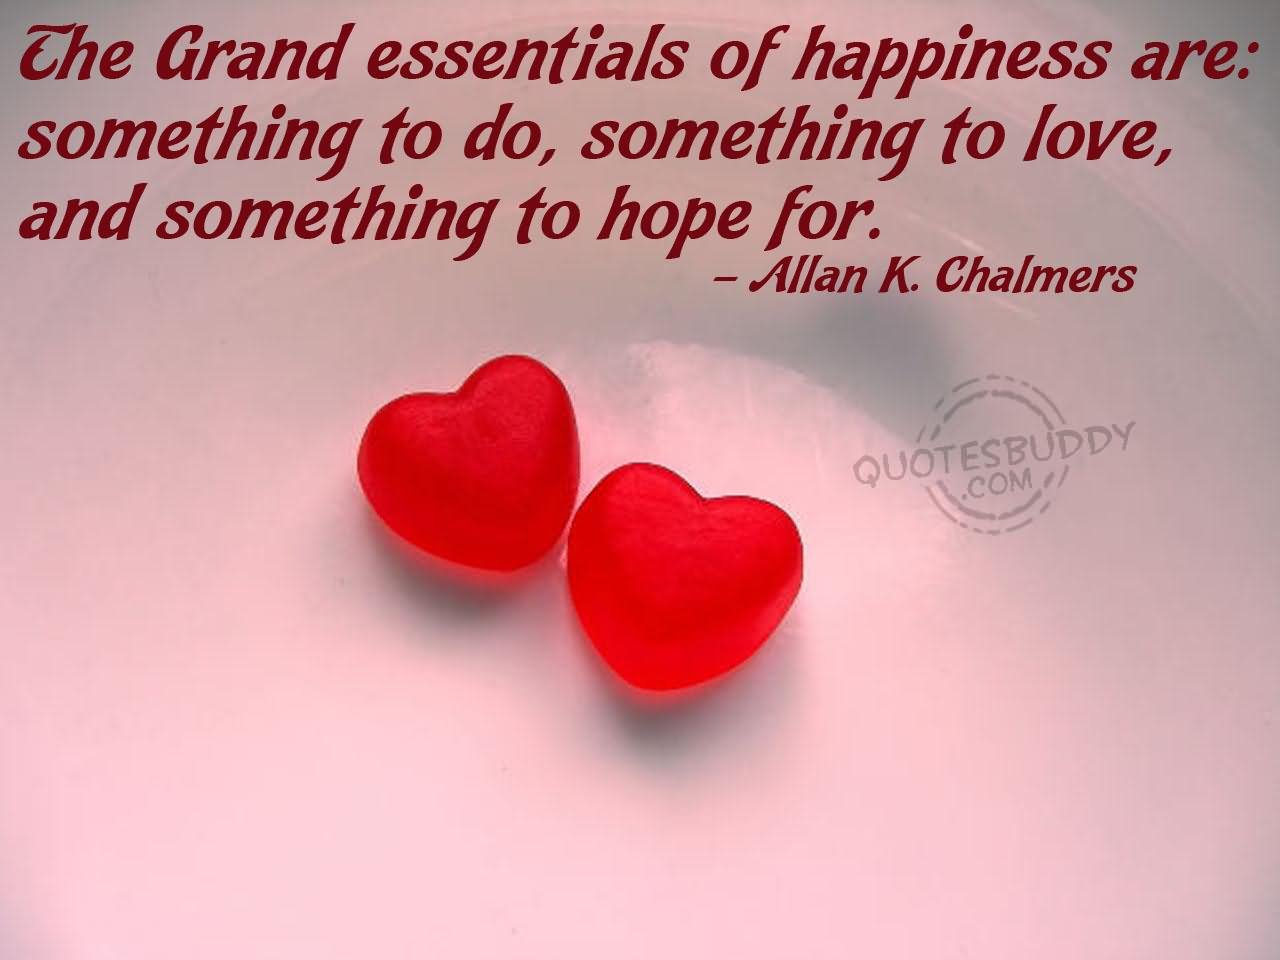 The grand essentials of happiness are something to do, something to love, and something to hope for.